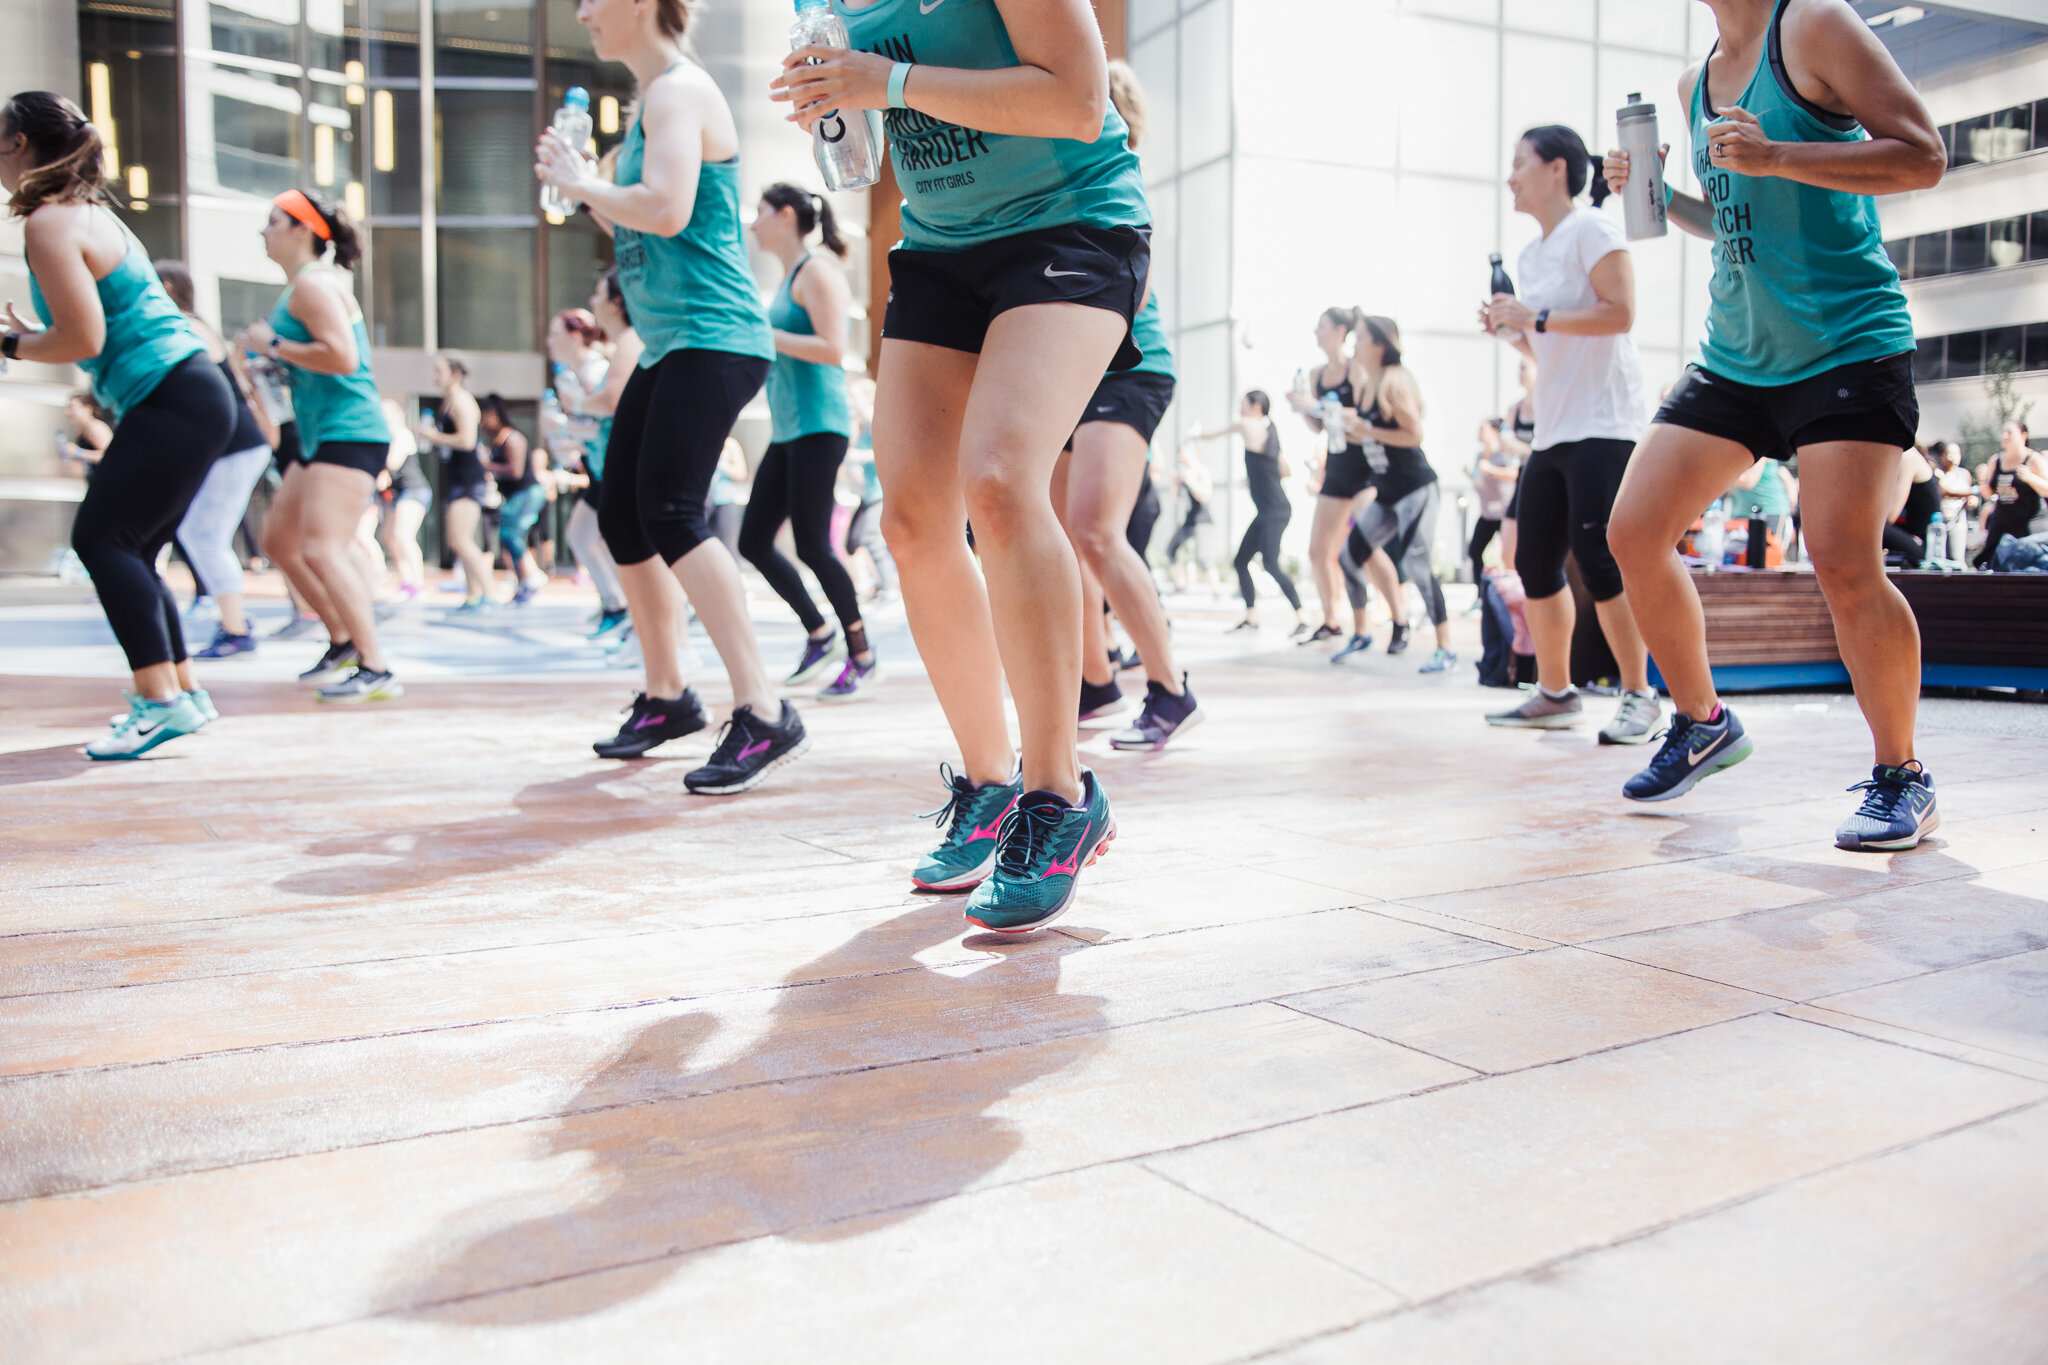 Runners: Are You Cross Training or Strength Training? — City Fit Girls